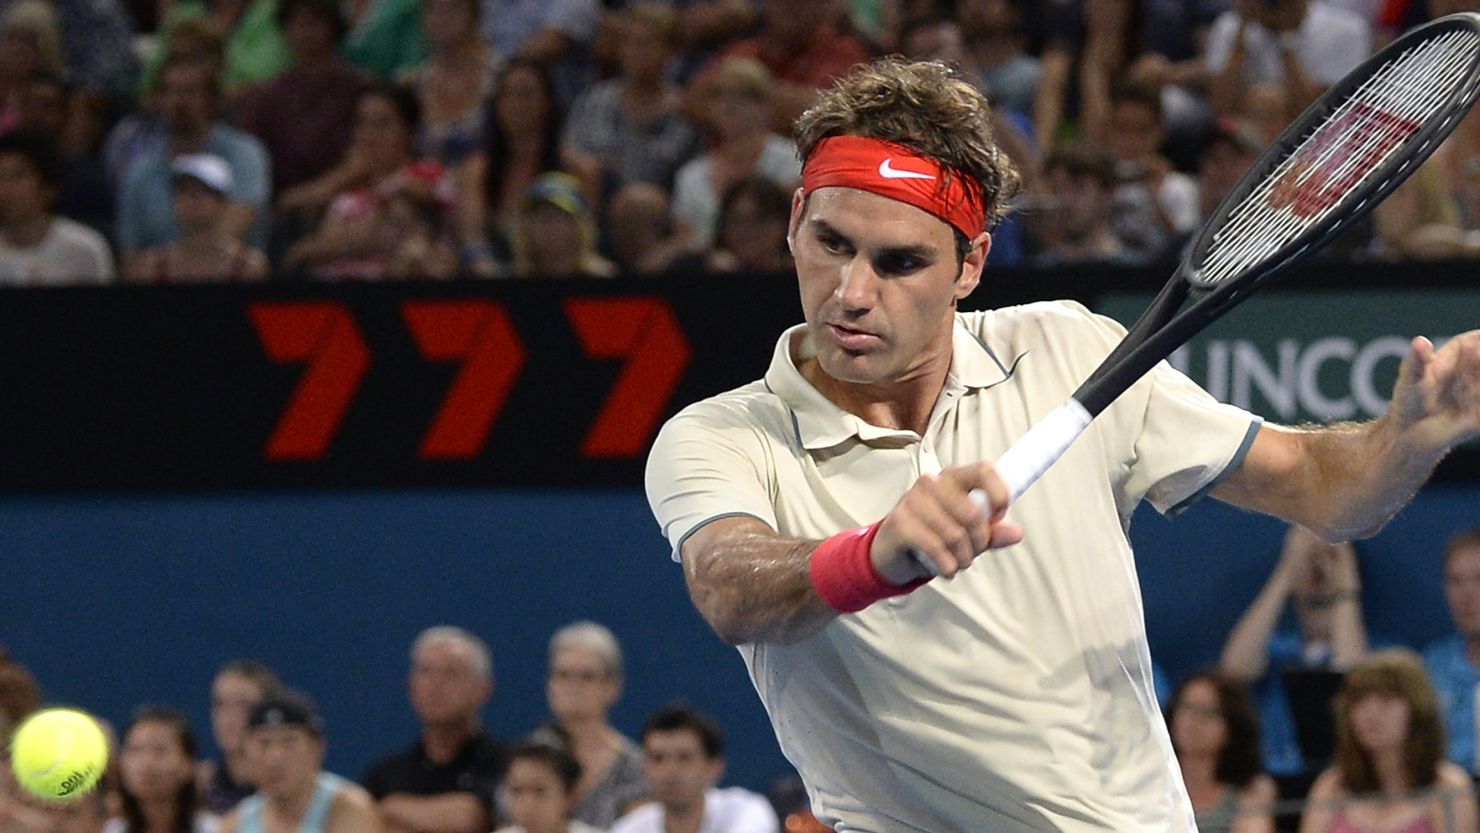 Roger Federer is the picture of concentration during his straight sets victory over Jarkko Nieminen in Brisbane on New Year's Day.